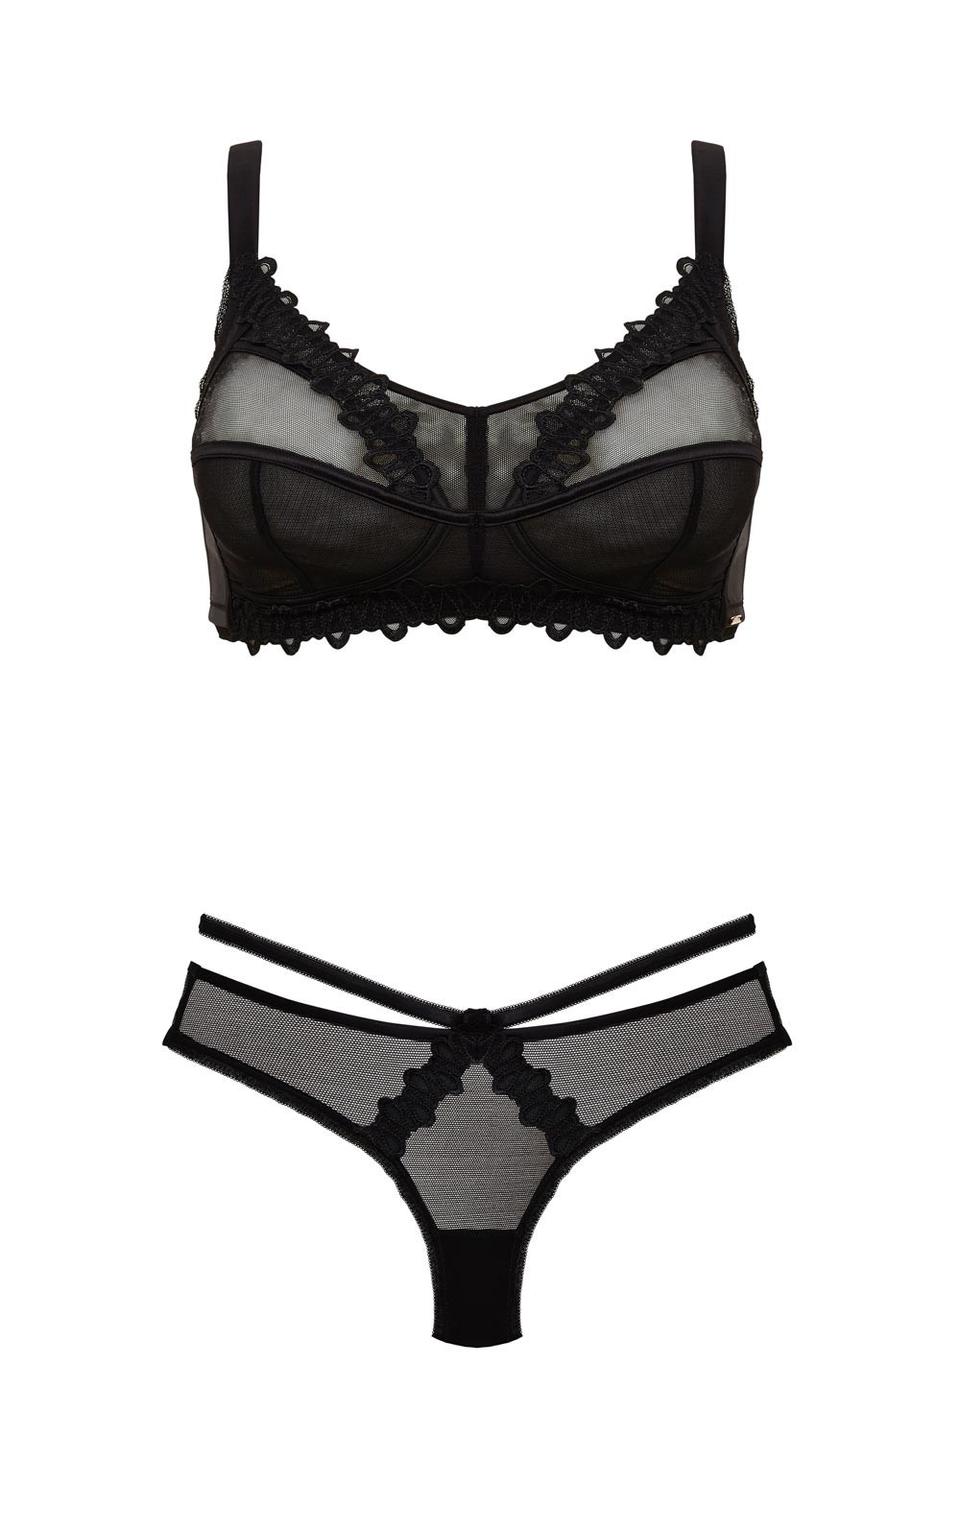 21 Sexy Honeymoon Lingerie Sets That Every Bride Needs To See Uk Uk